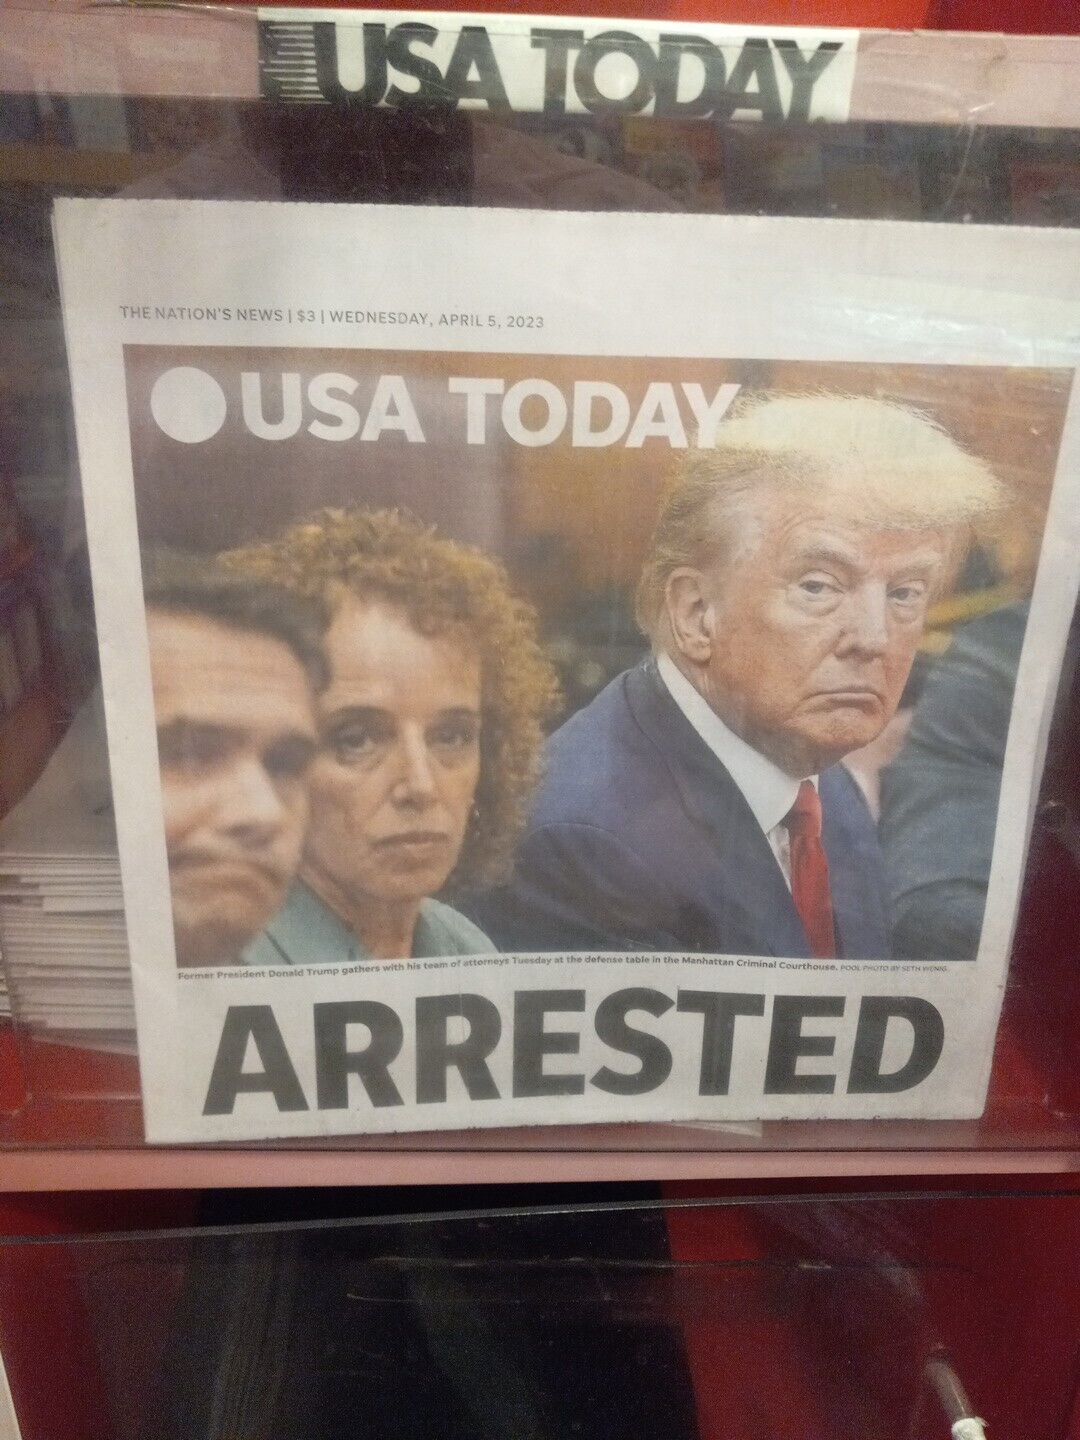 USA TODAY WEDNESDAY, APRIL 5, 2023 (TRUMP ARRESTED)